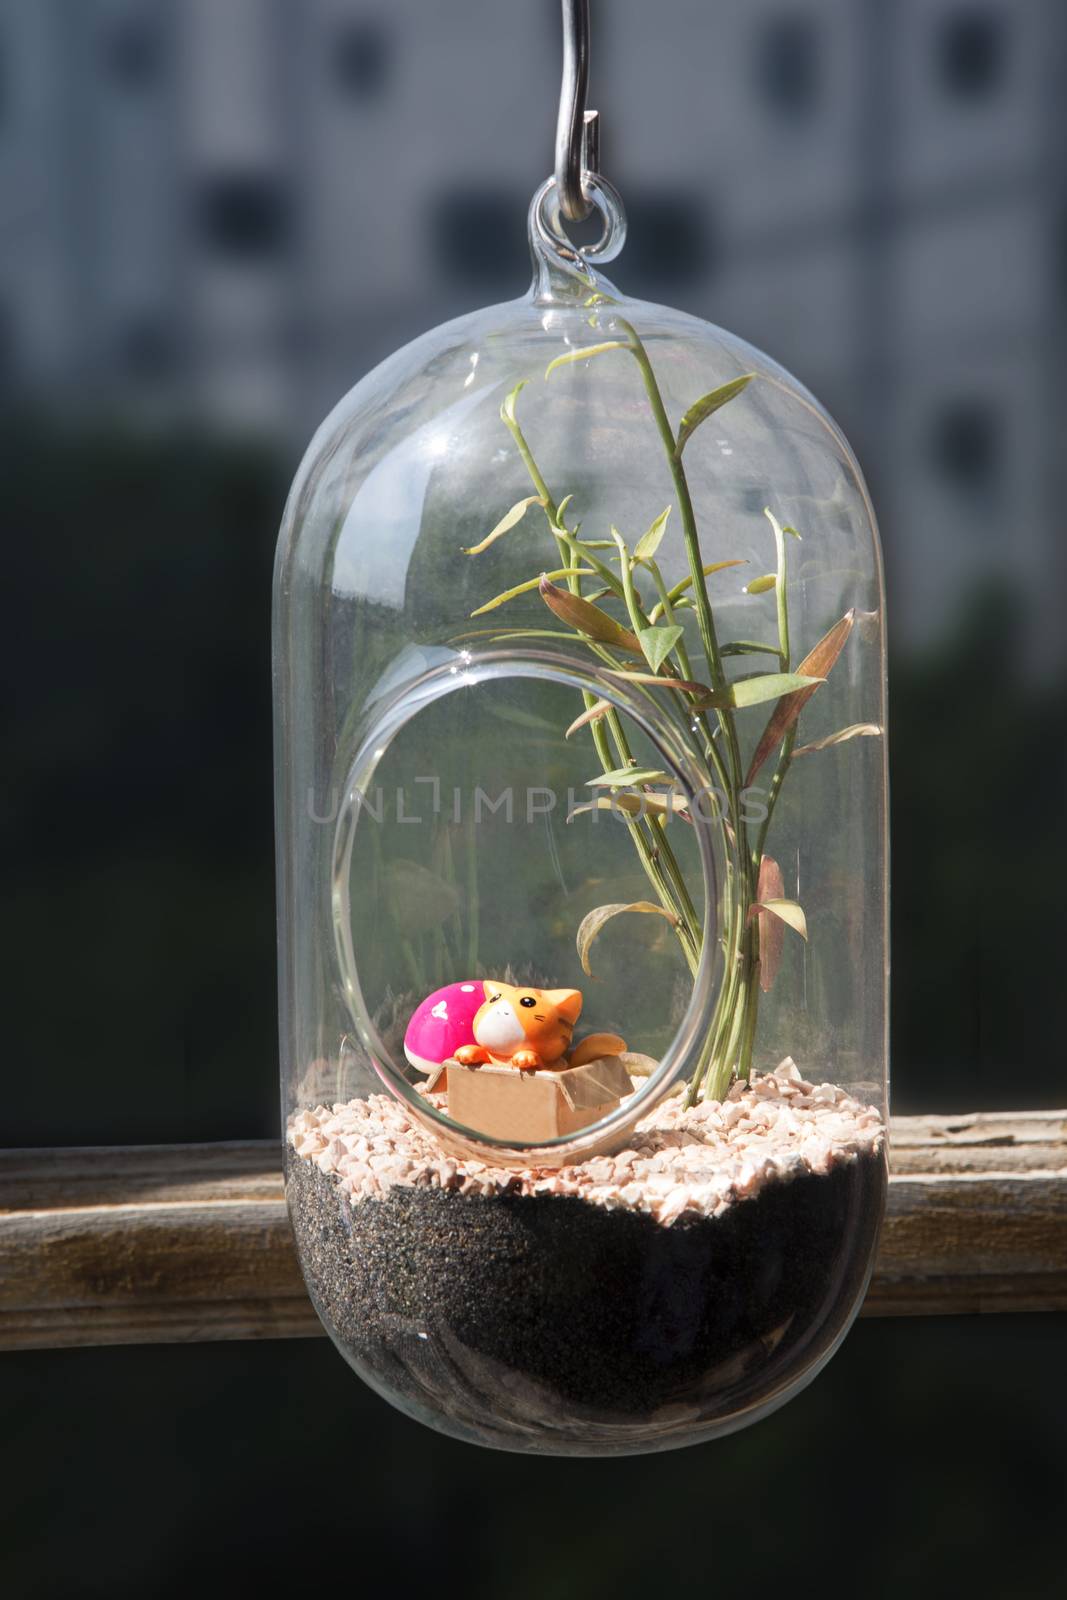 Small garden in glass container. by pandpstock_002